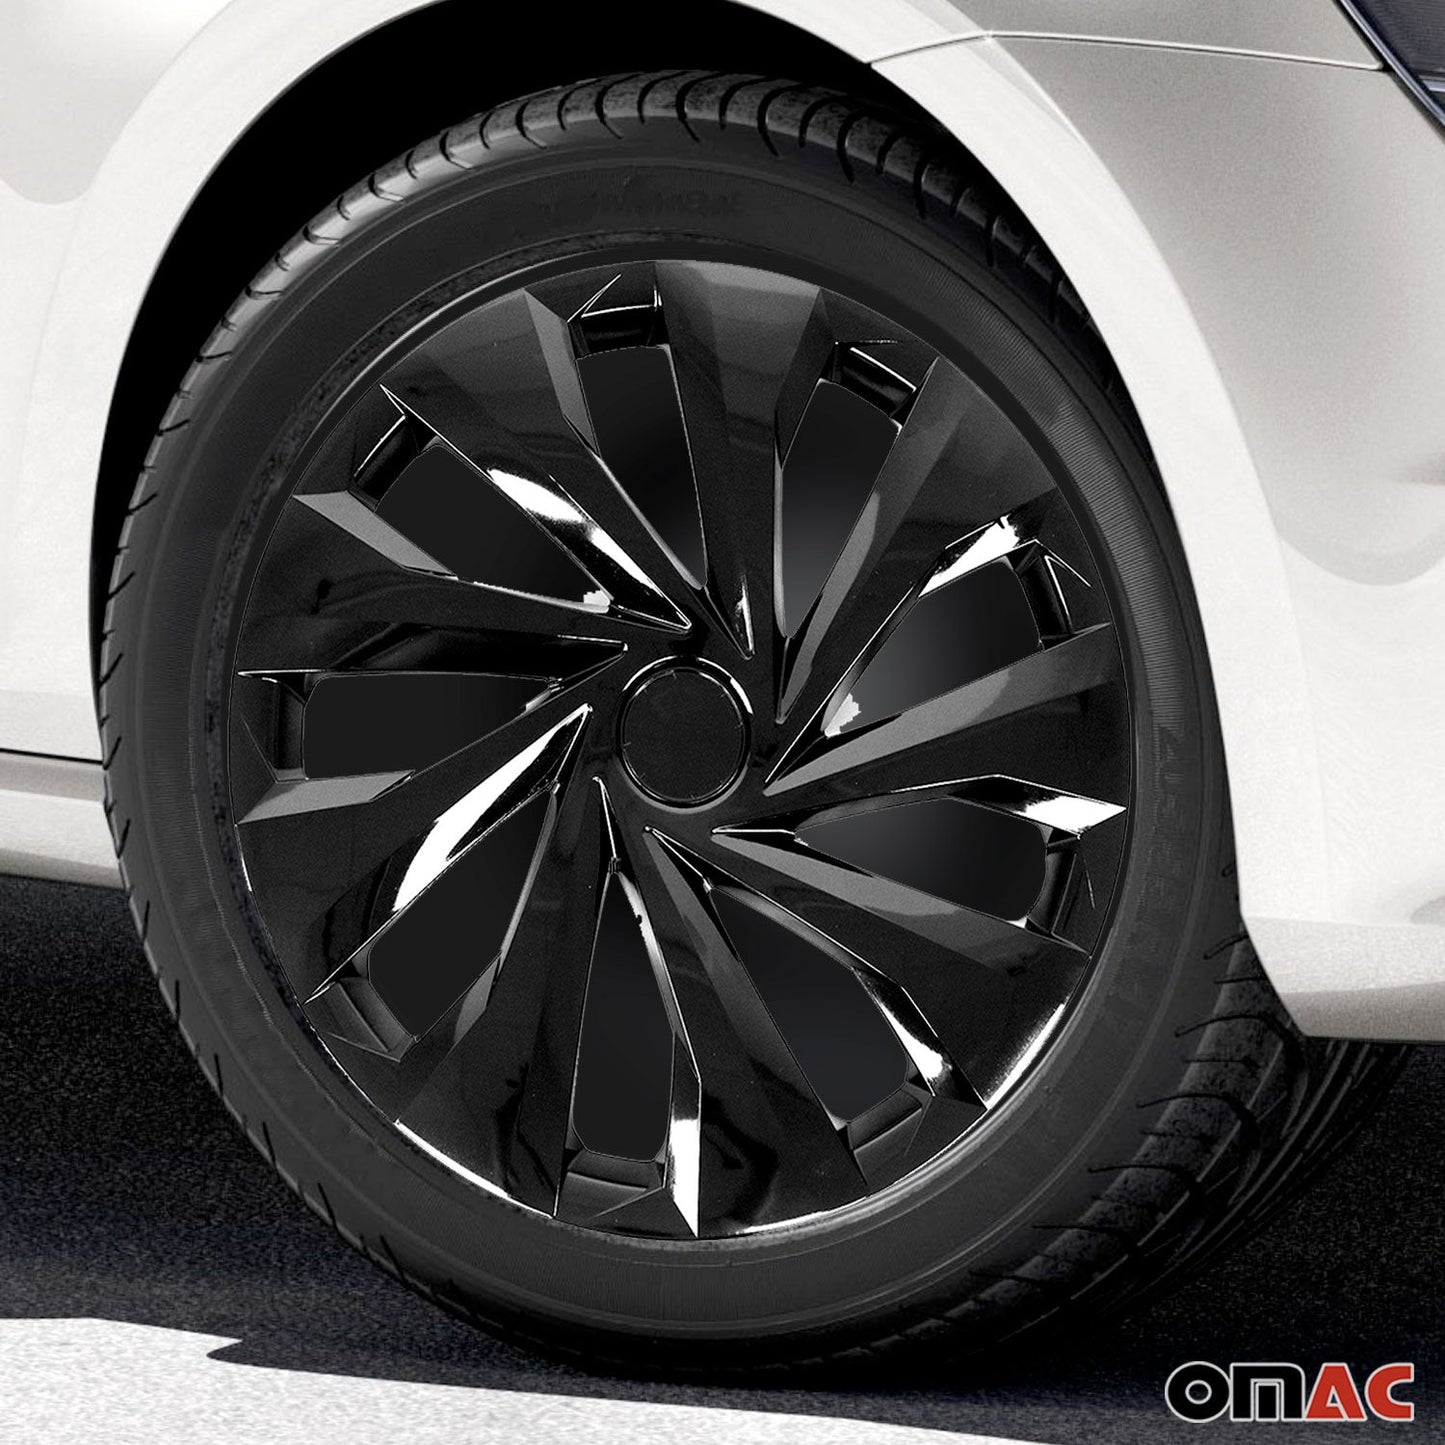 OMAC 15 Inch Wheel Rim Covers Hubcaps for Toyota Black Gloss A017778